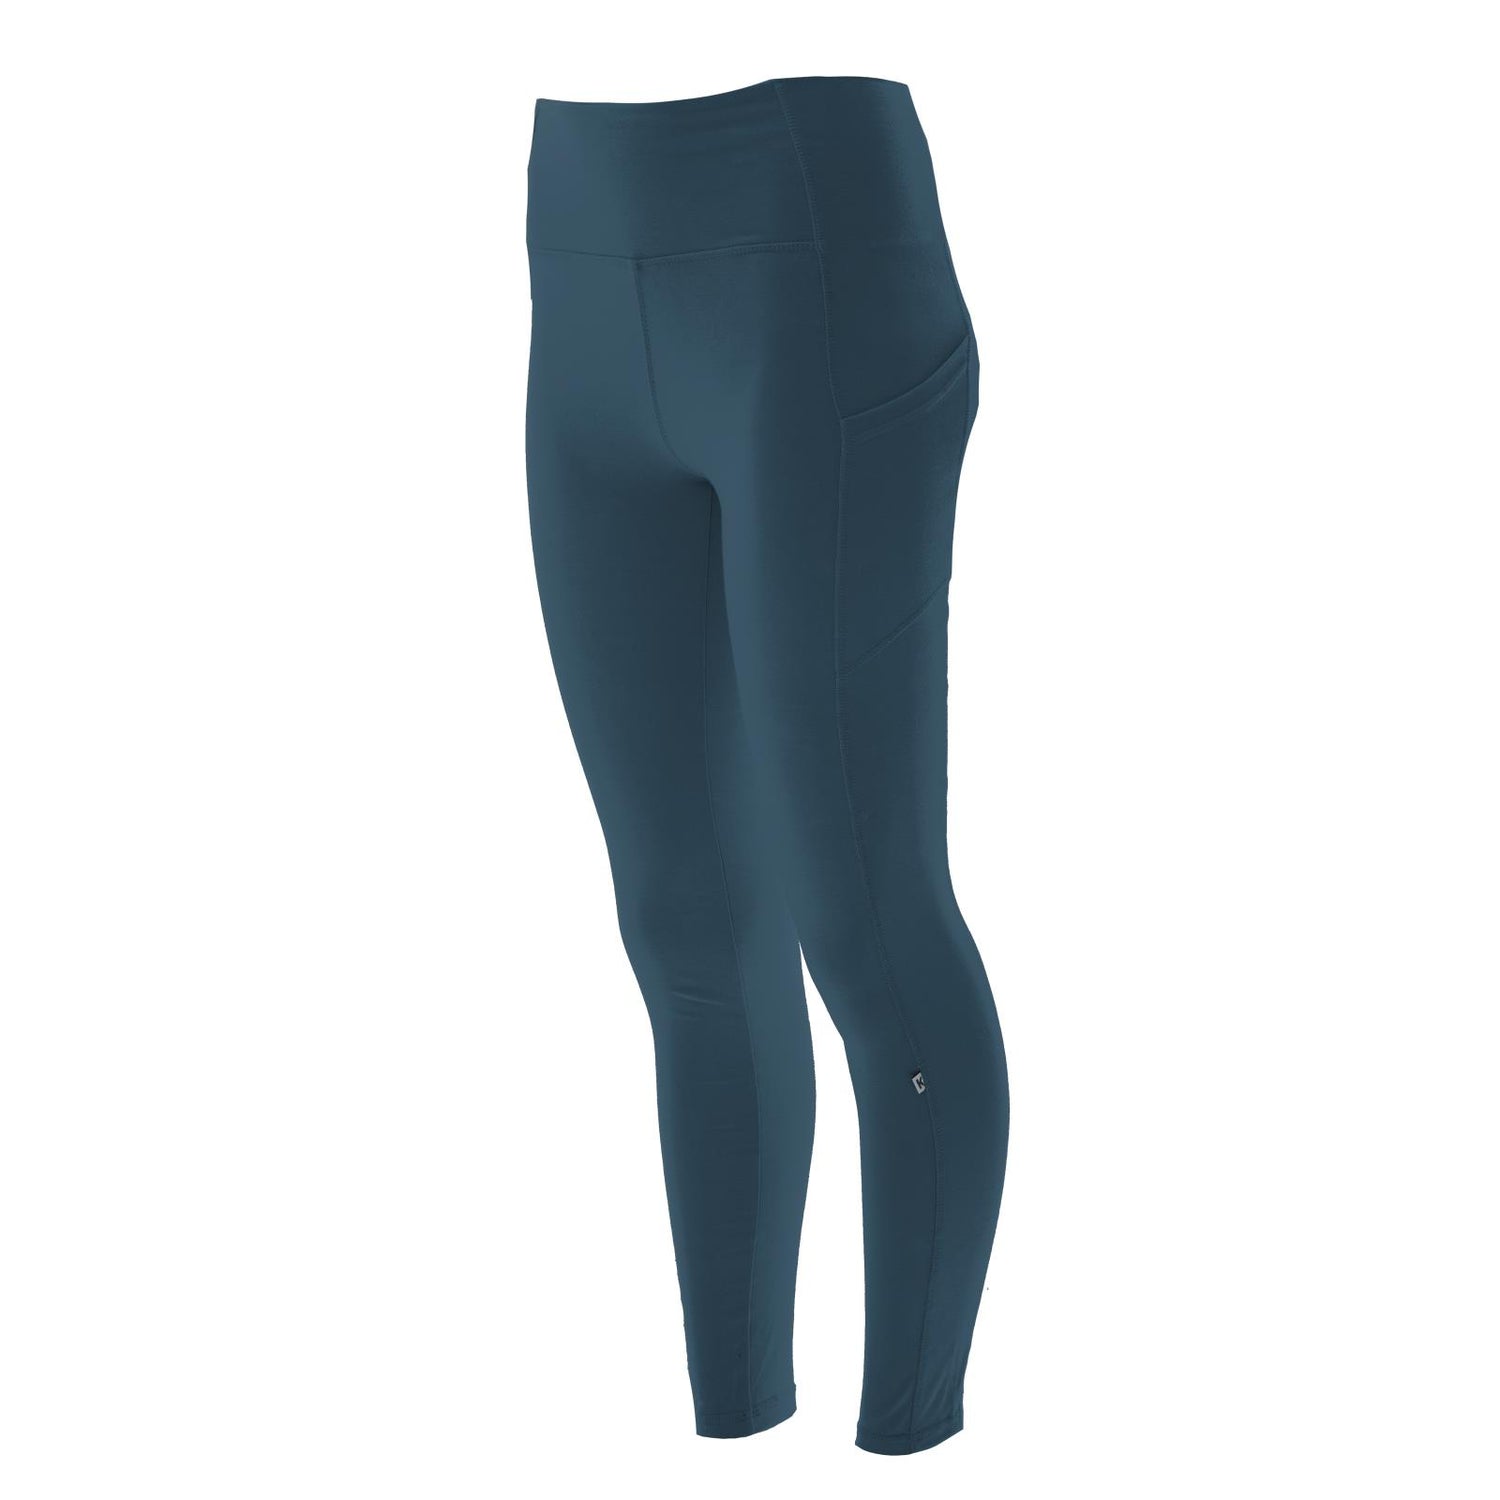 Women's Luxe Stretch Leggings with Pockets in Peacock